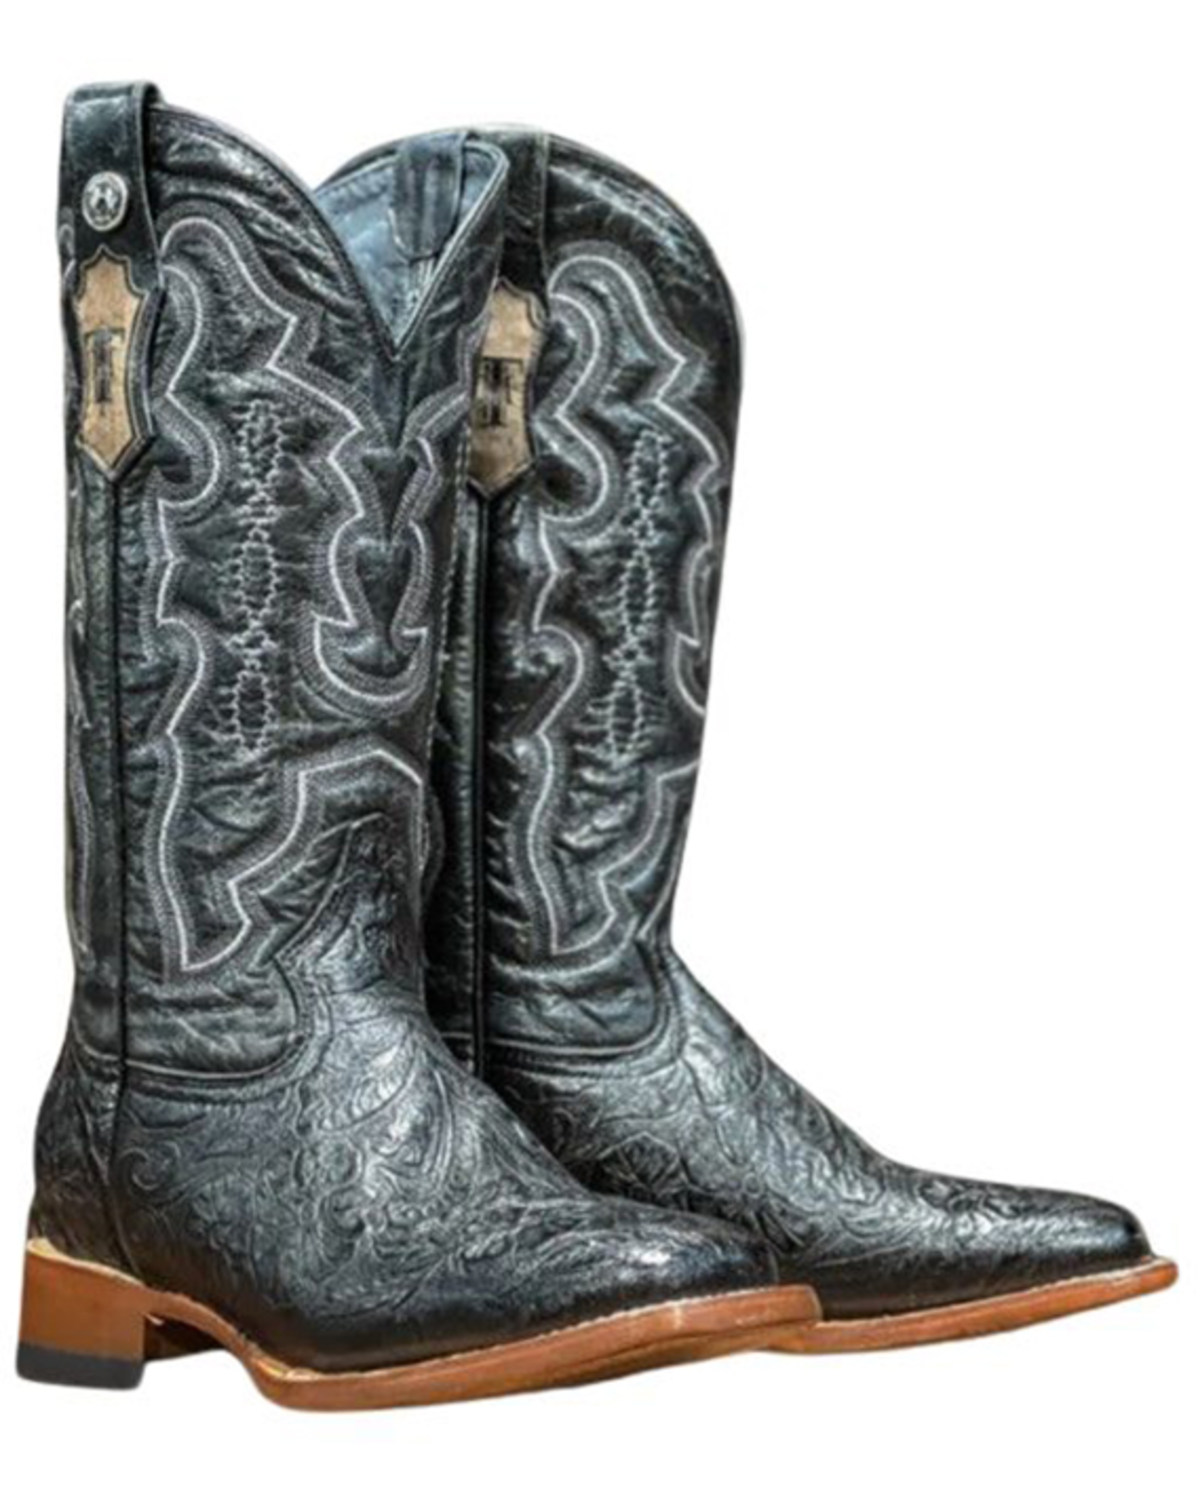 Tanner Mark Women's Mendocino Tooled Western Boots - Broad Square Toe